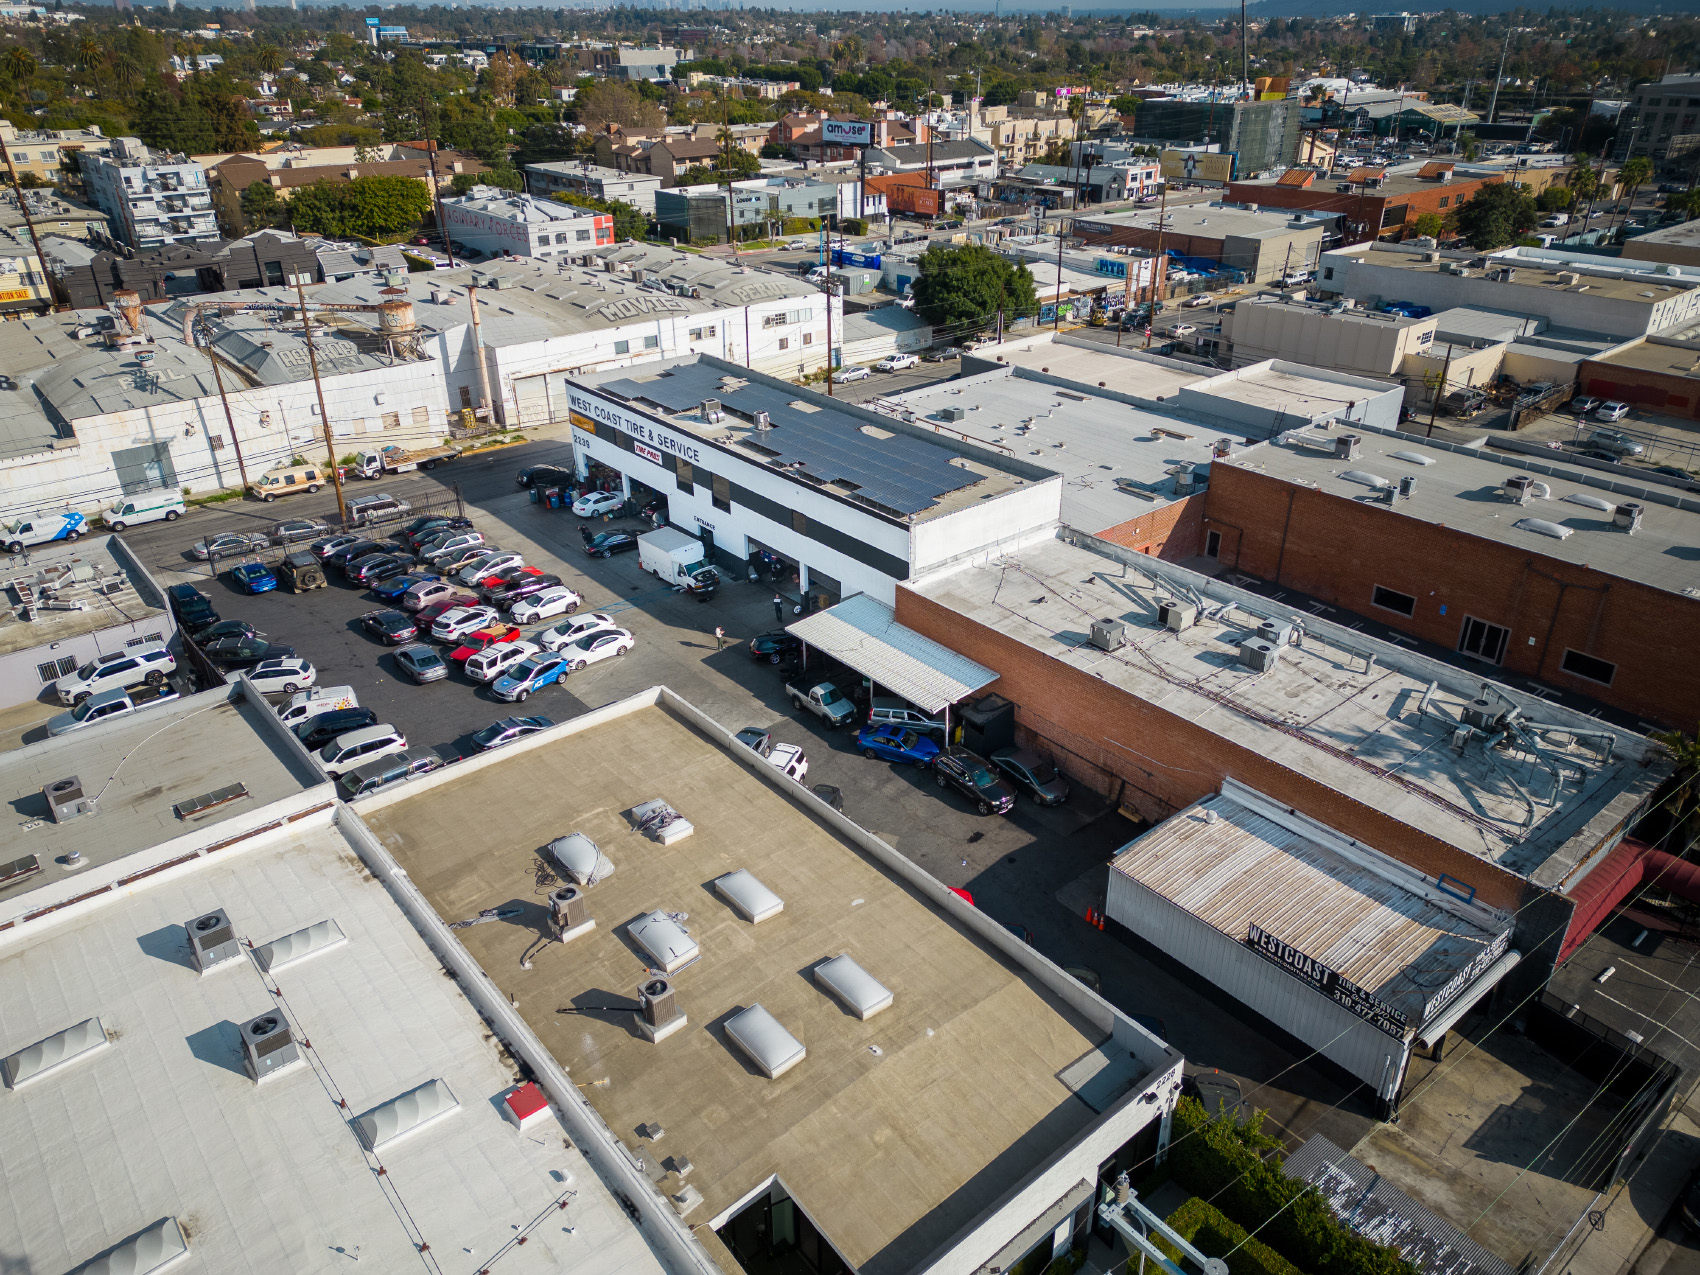 Explore our Los Angeles facility through these aerial shots